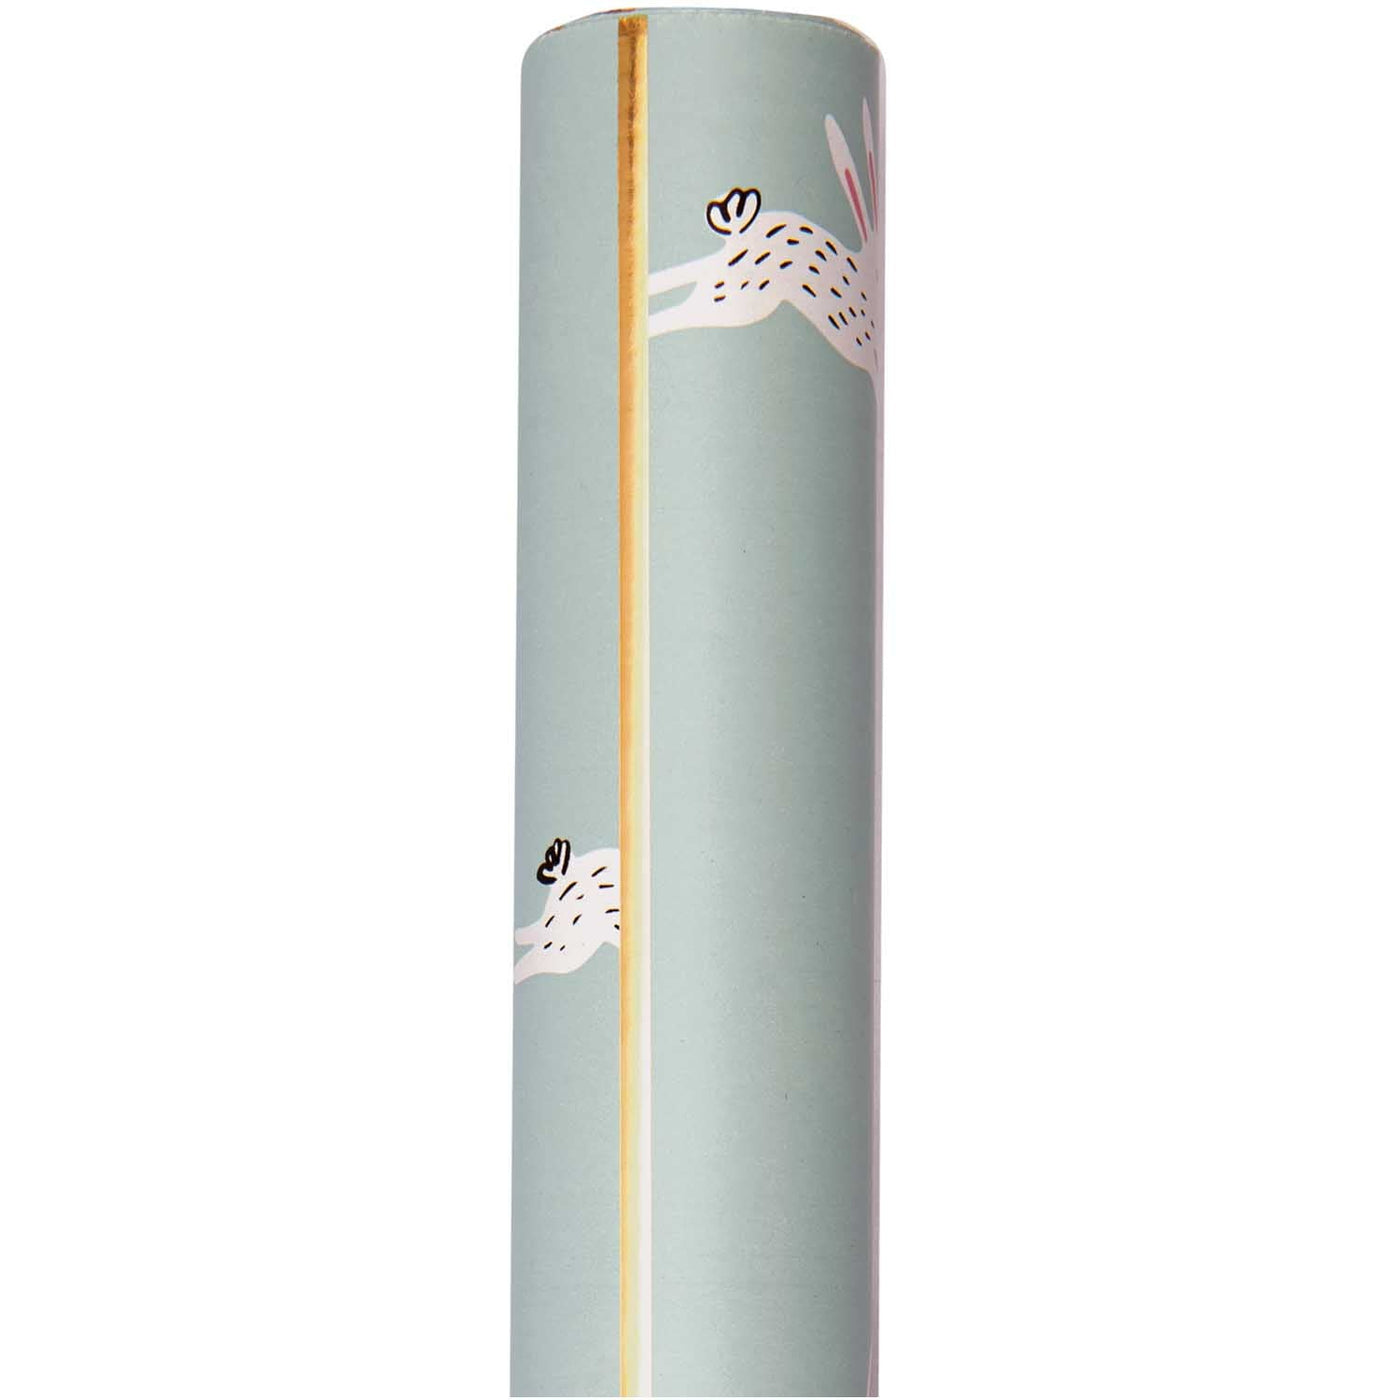 Wrapping Paper Roll - Bunnies - Rico Design